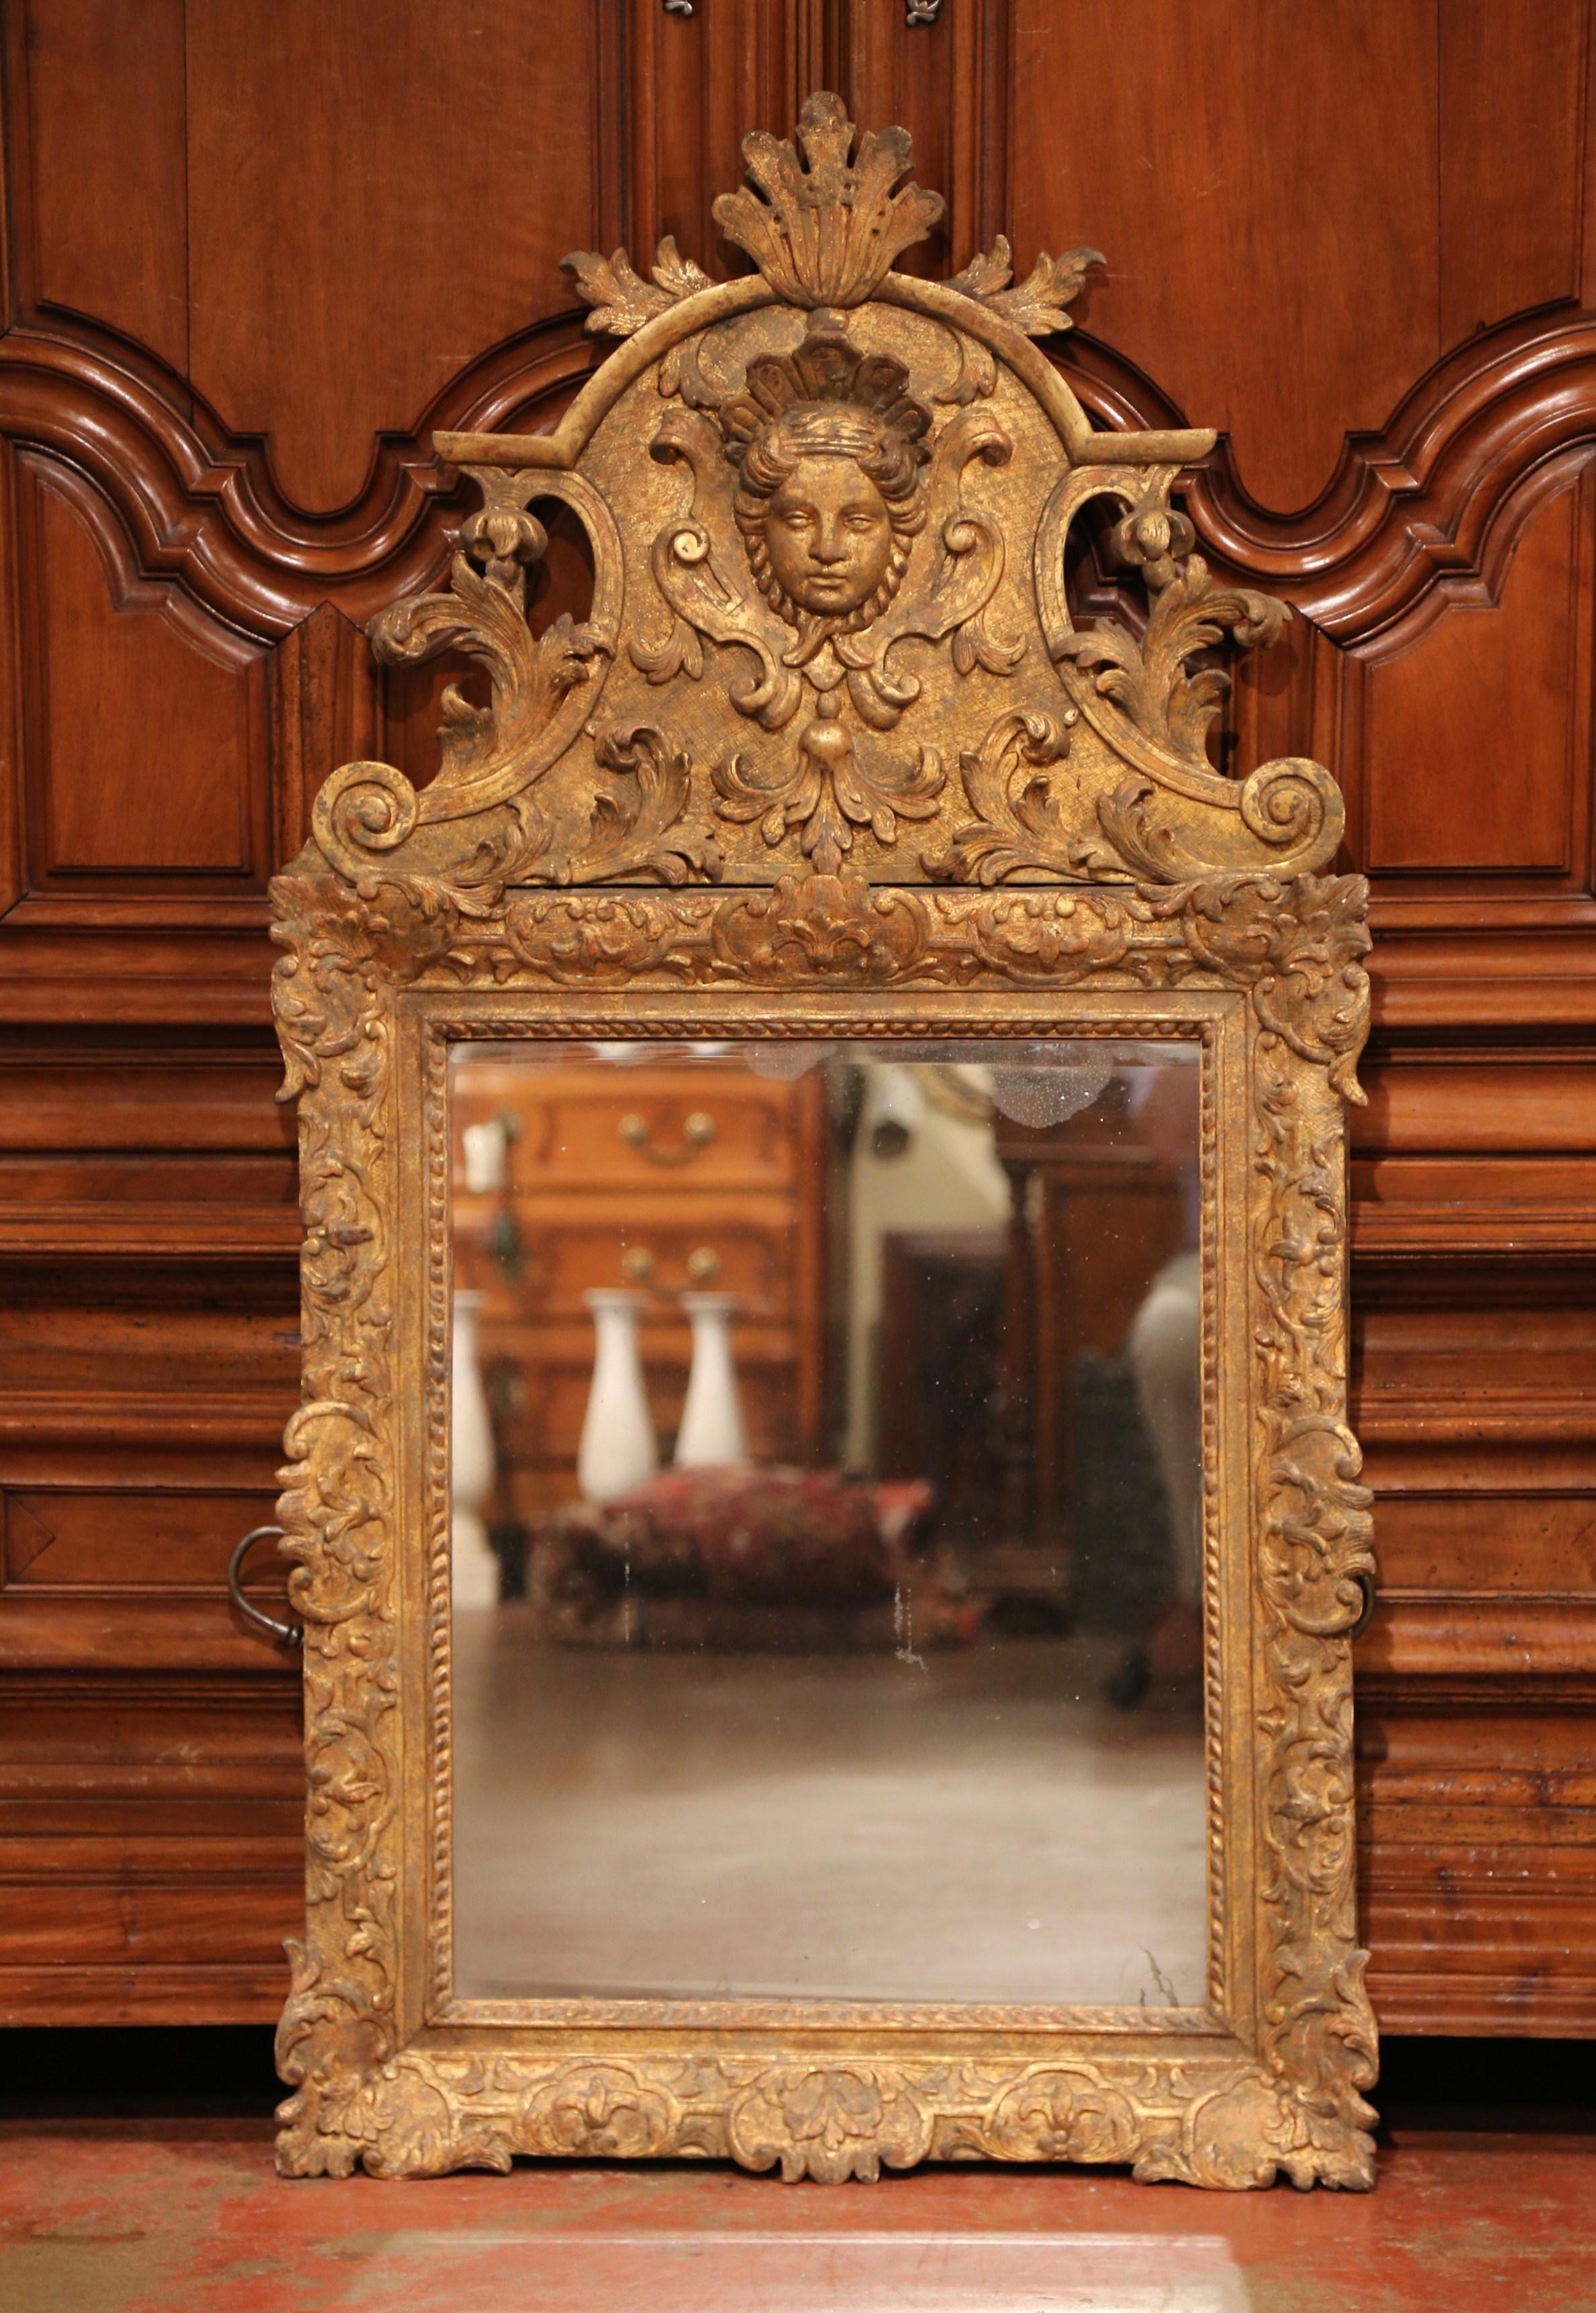 18th Century French Regence Carved Giltwood Wall Mirror with Ornate Pediment In Excellent Condition For Sale In Dallas, TX